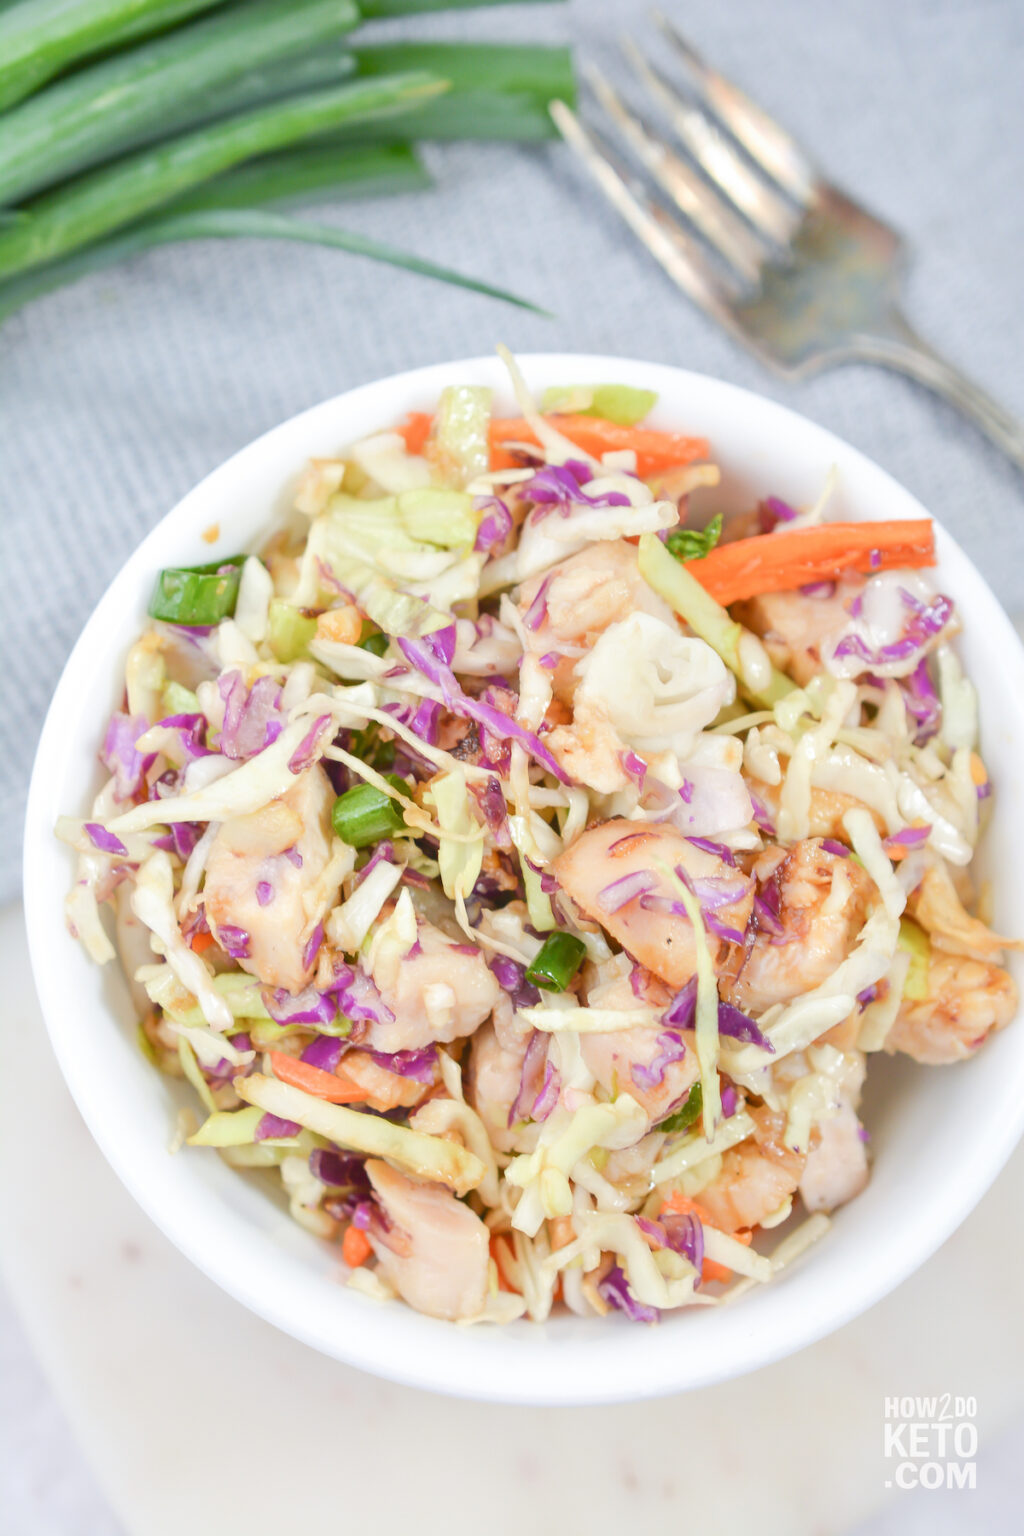 shredded chicken salad with cabbage.